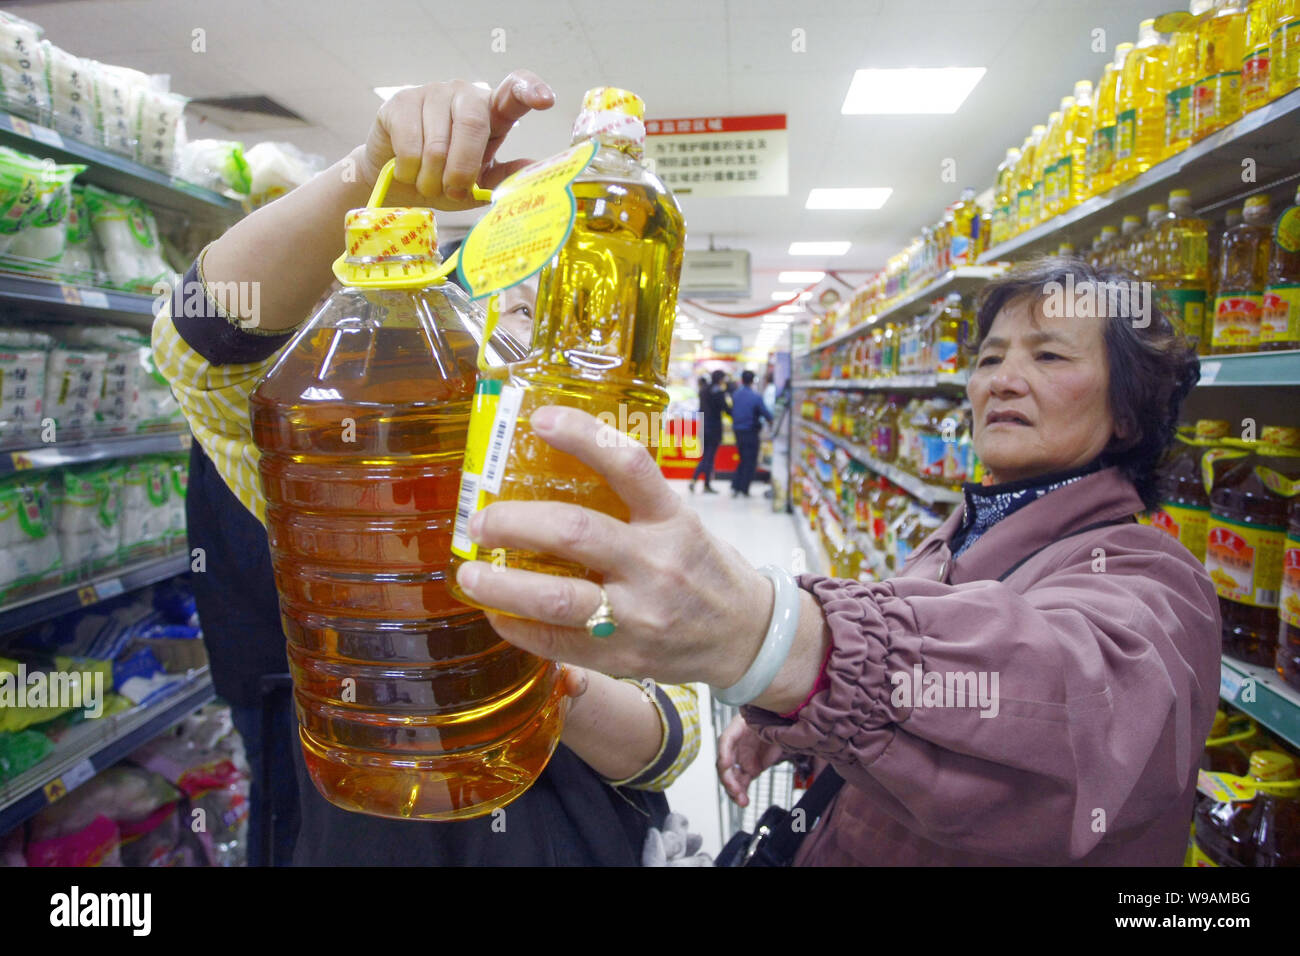 Chinese customers shop for cooking oil at a supermarket in Shanghai, China, 14 December 2010.   Cooking oil, an otherwise innocuous kitchen item, lies Stock Photo